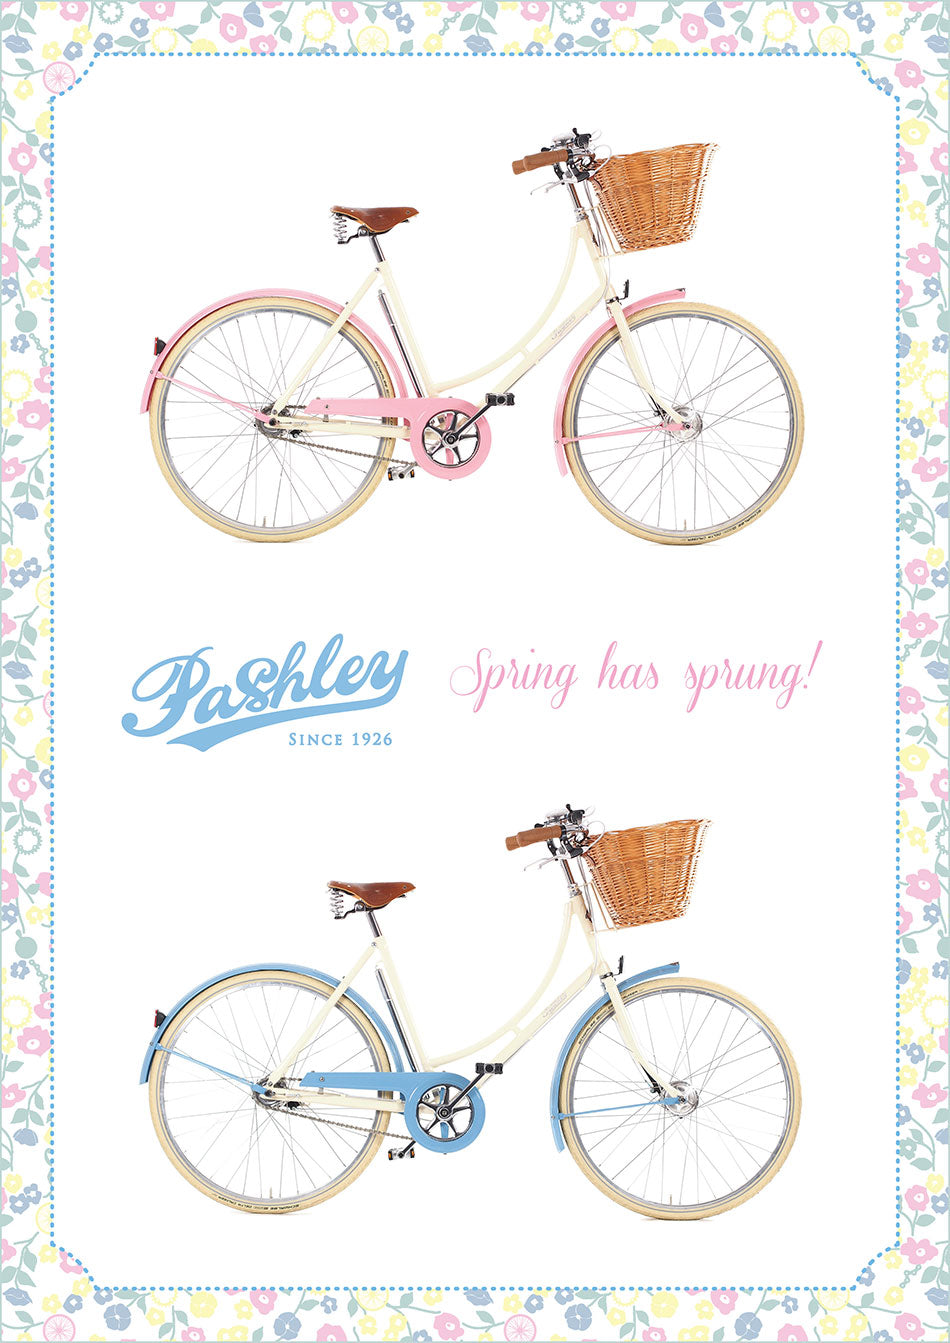 A poster of the Pashley Sonnet Springtime with a floral printed border, in hues of pink and blue.